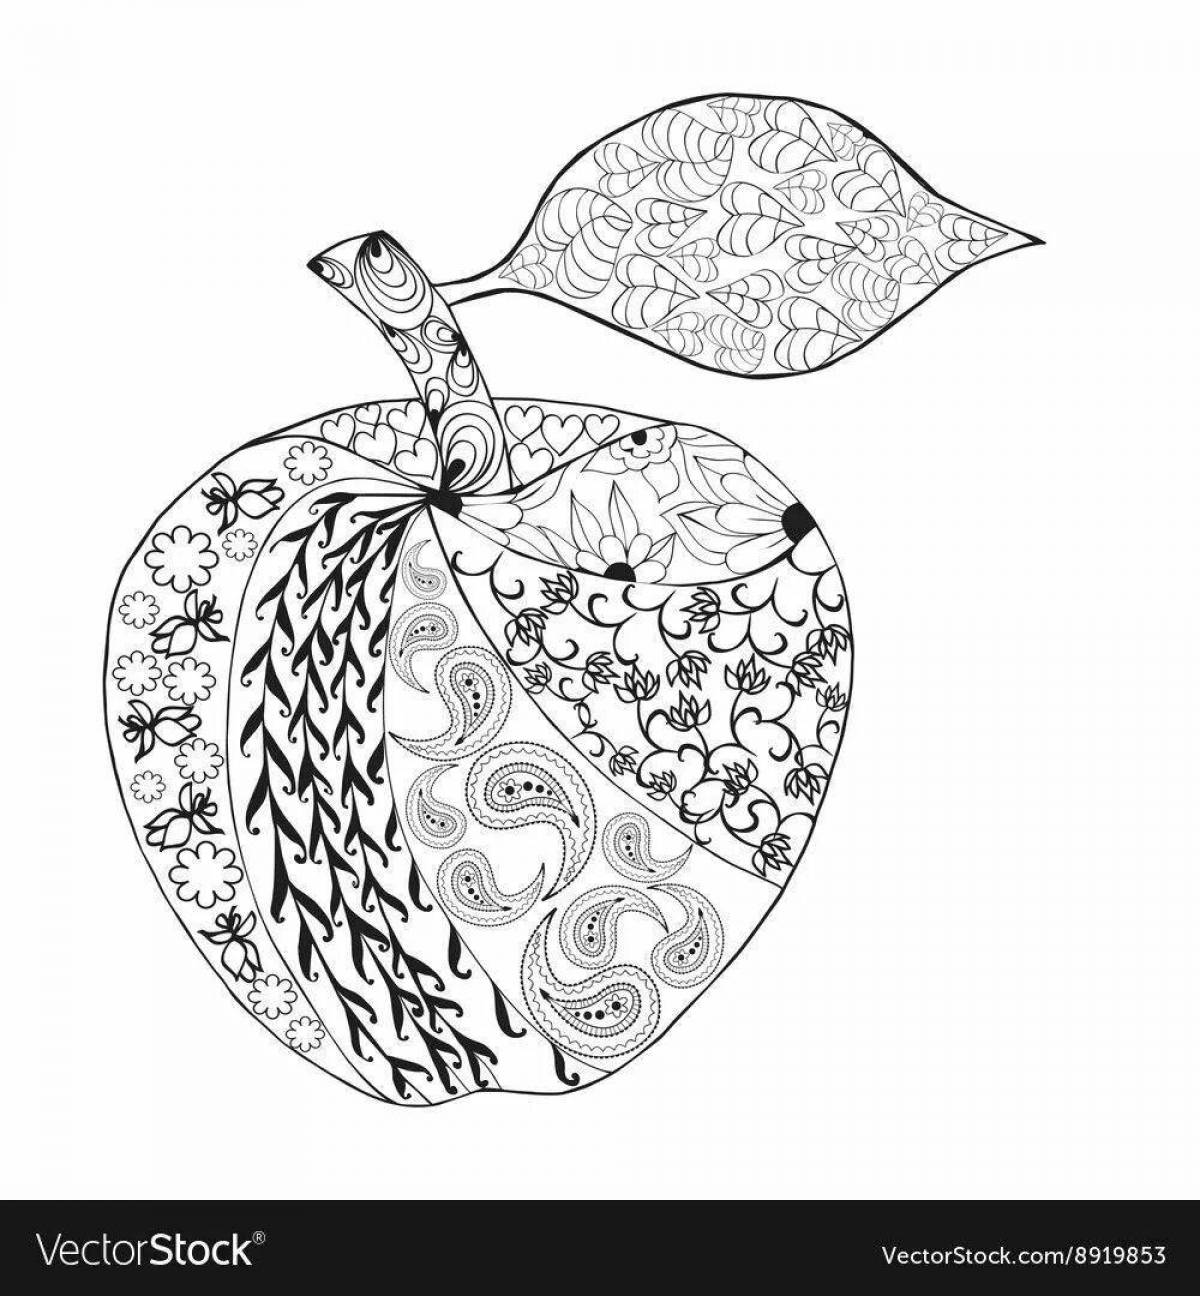 Relaxing anti-stress coloring book apple